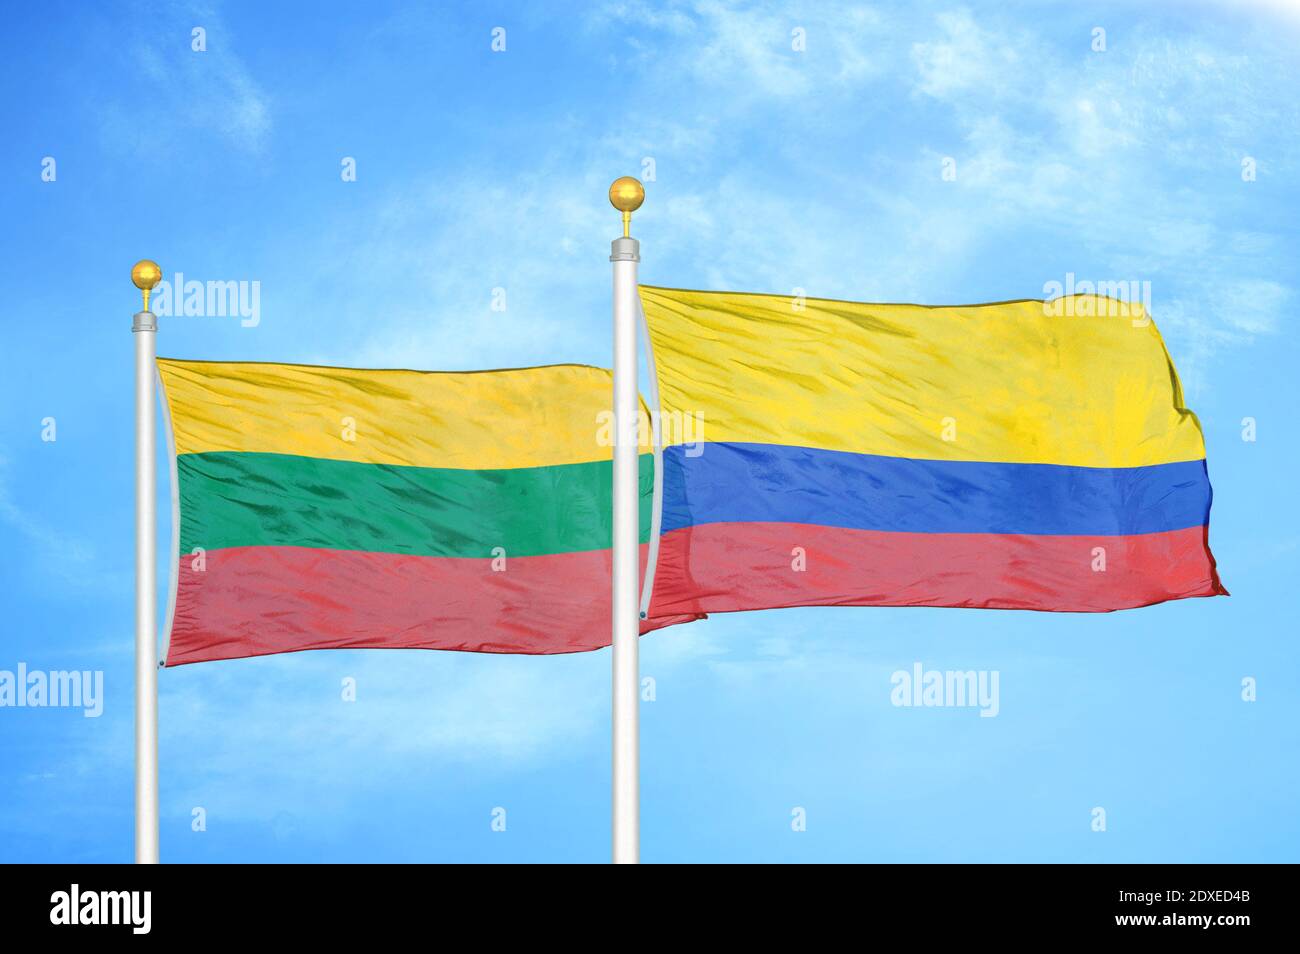 Lithuania and Colombia two flags on flagpoles and blue sky Stock Photo